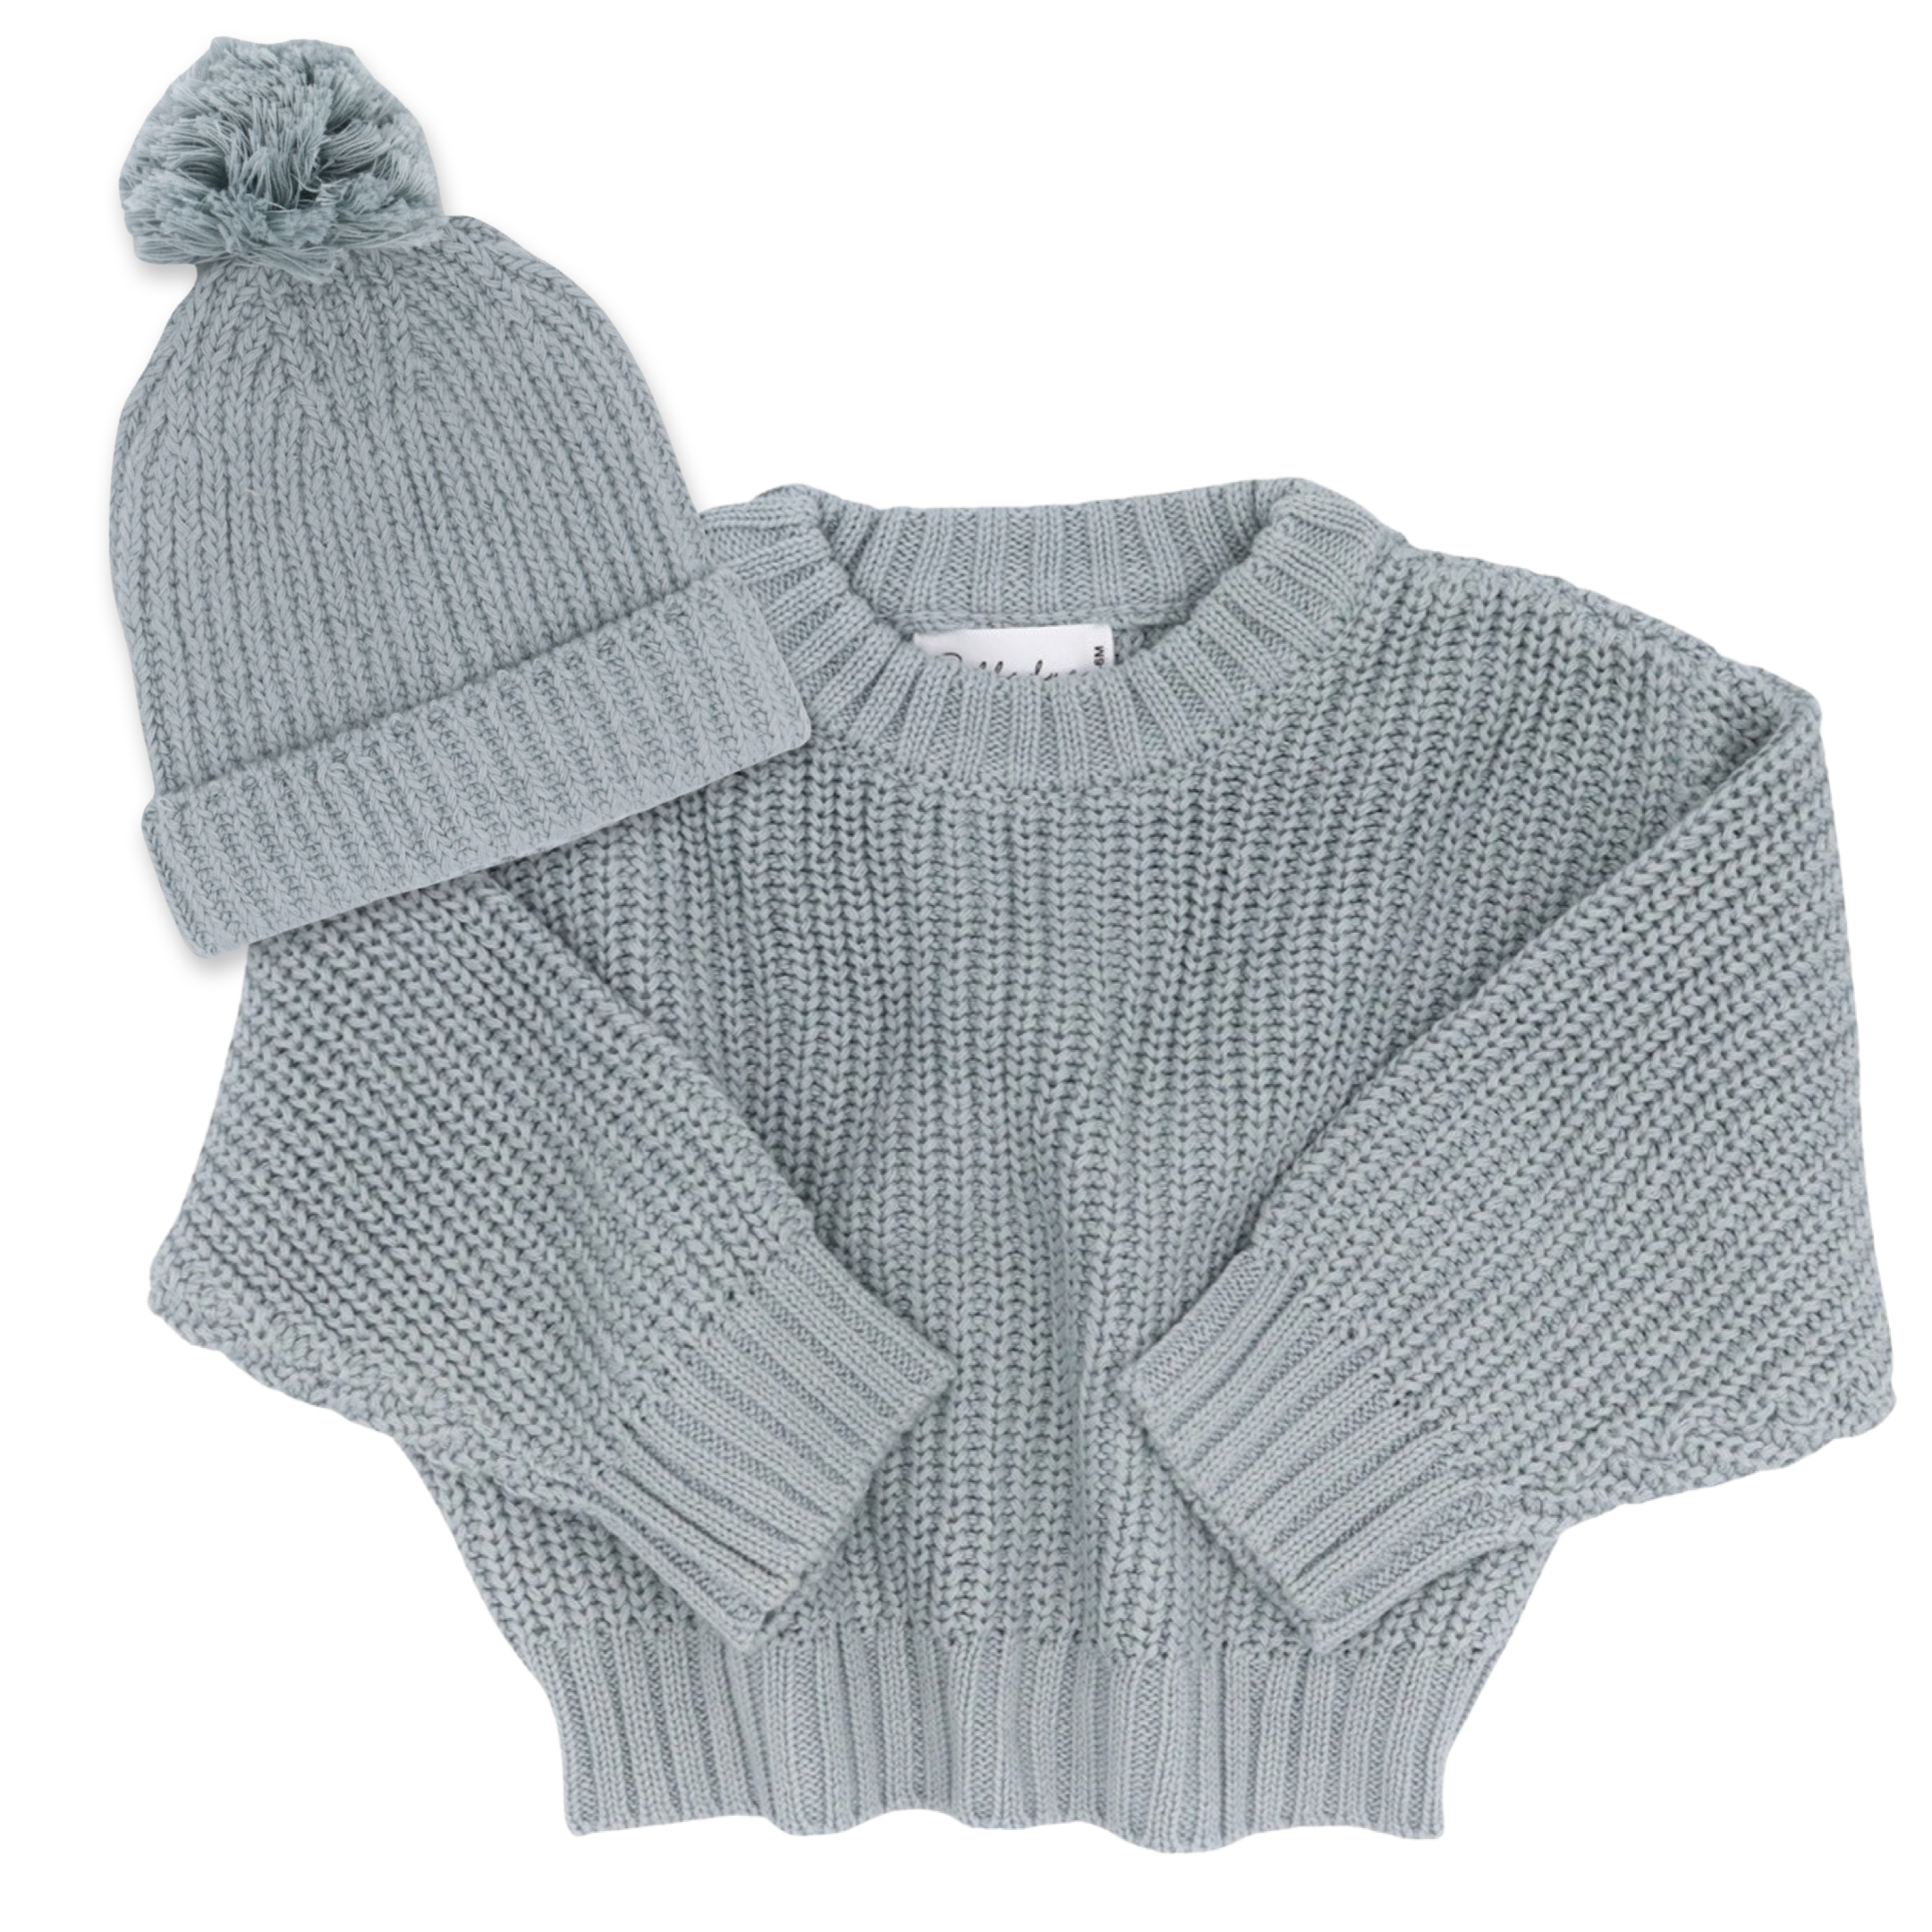 Bubbadue Knitted Baby Jersey & Beanie Set - Misty Blue - Bubbadue